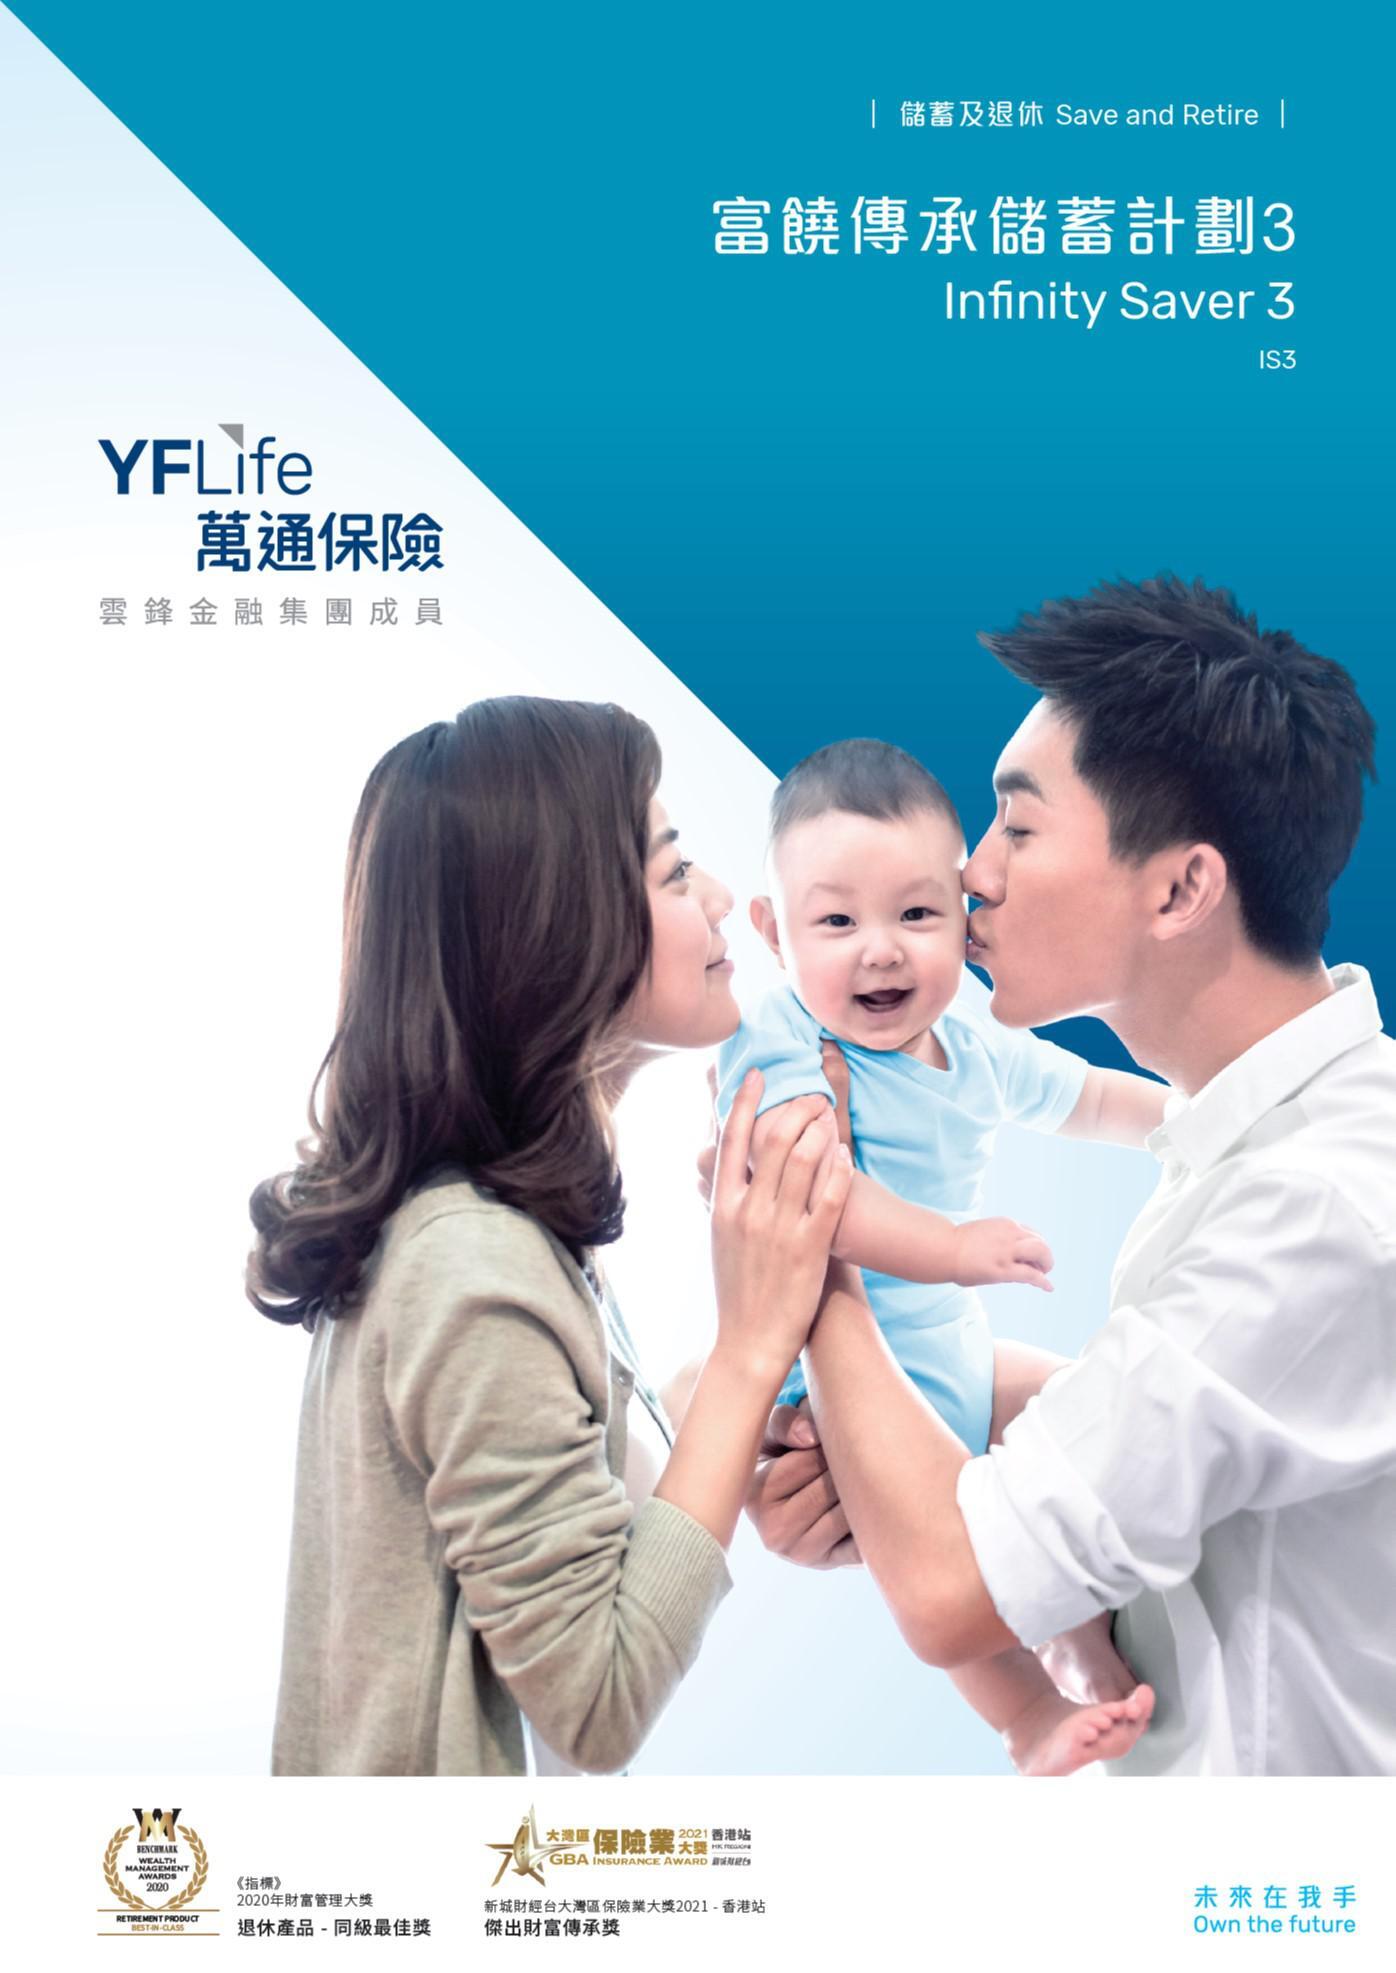 YF Life enhances “Infinity Saver 3” with newly added multiple currency options and Currency Exchange Option, flexibly supporting customers’ financial needs.